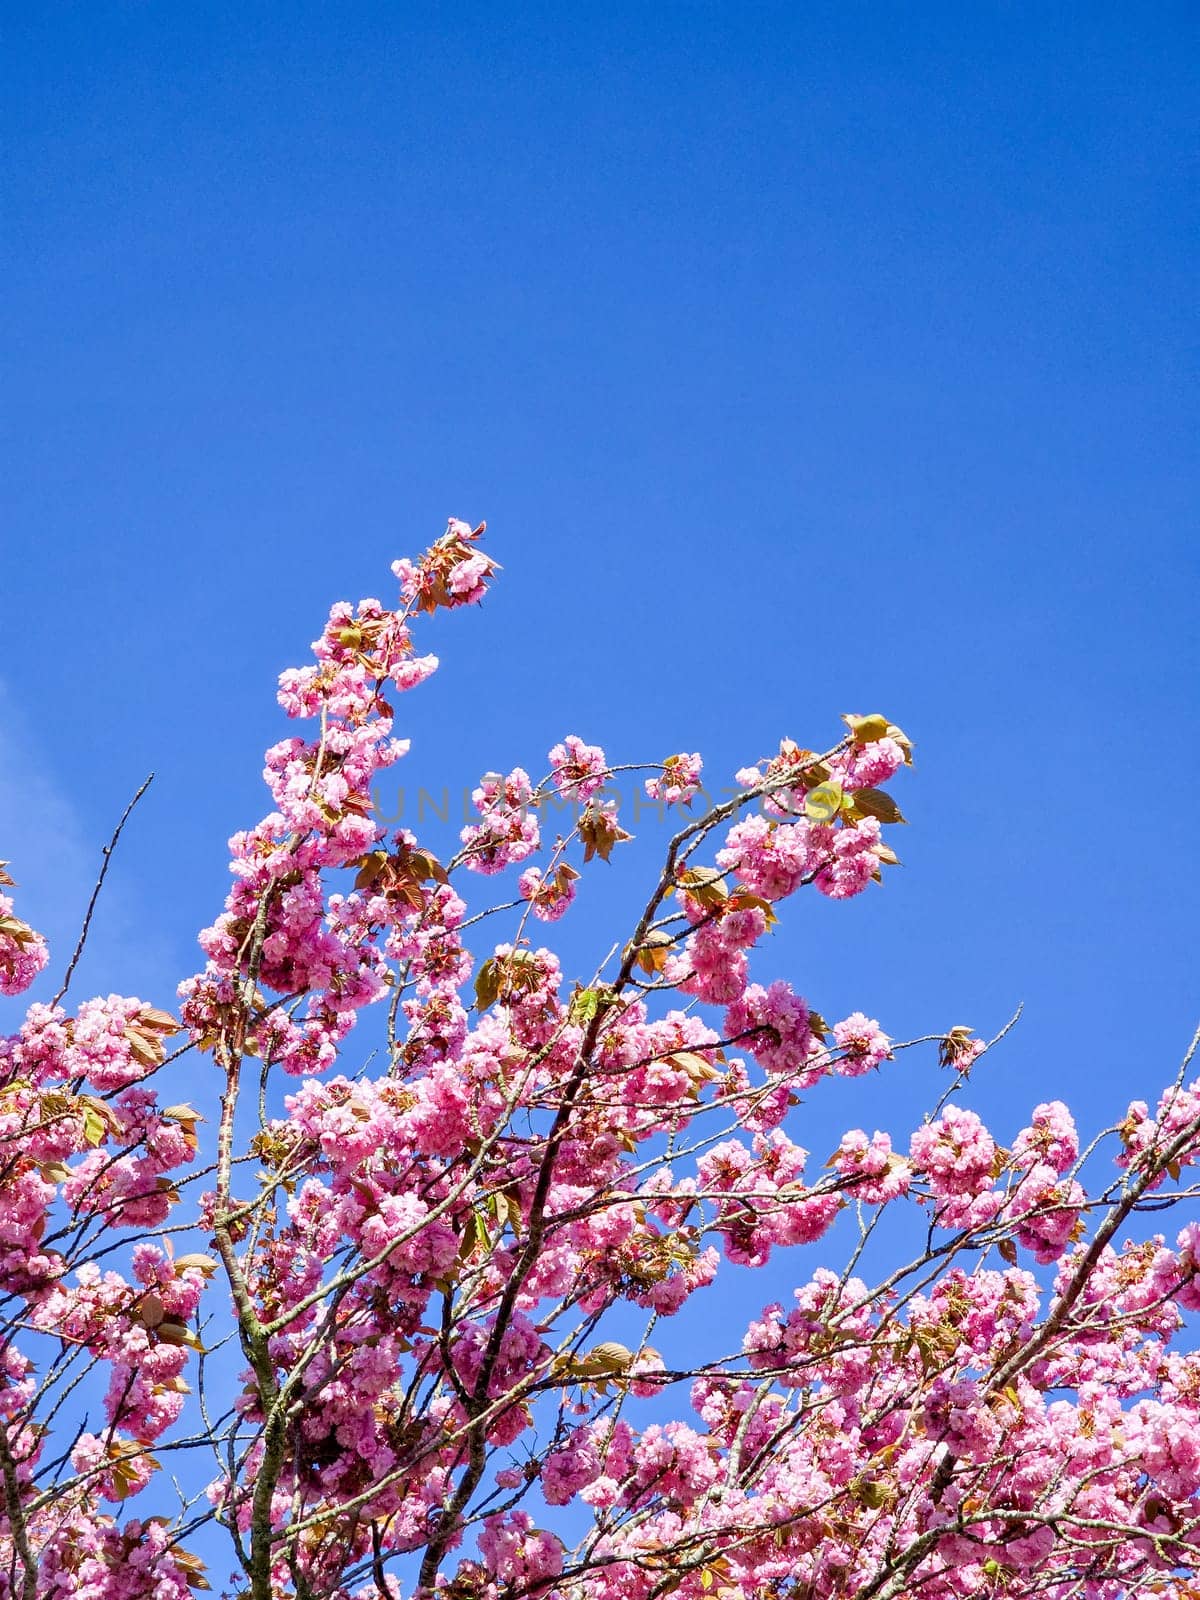 Spring blossom with a blue sky with clouds an purple flowers on a beautiful spring day in the Netherlands by fokkebok